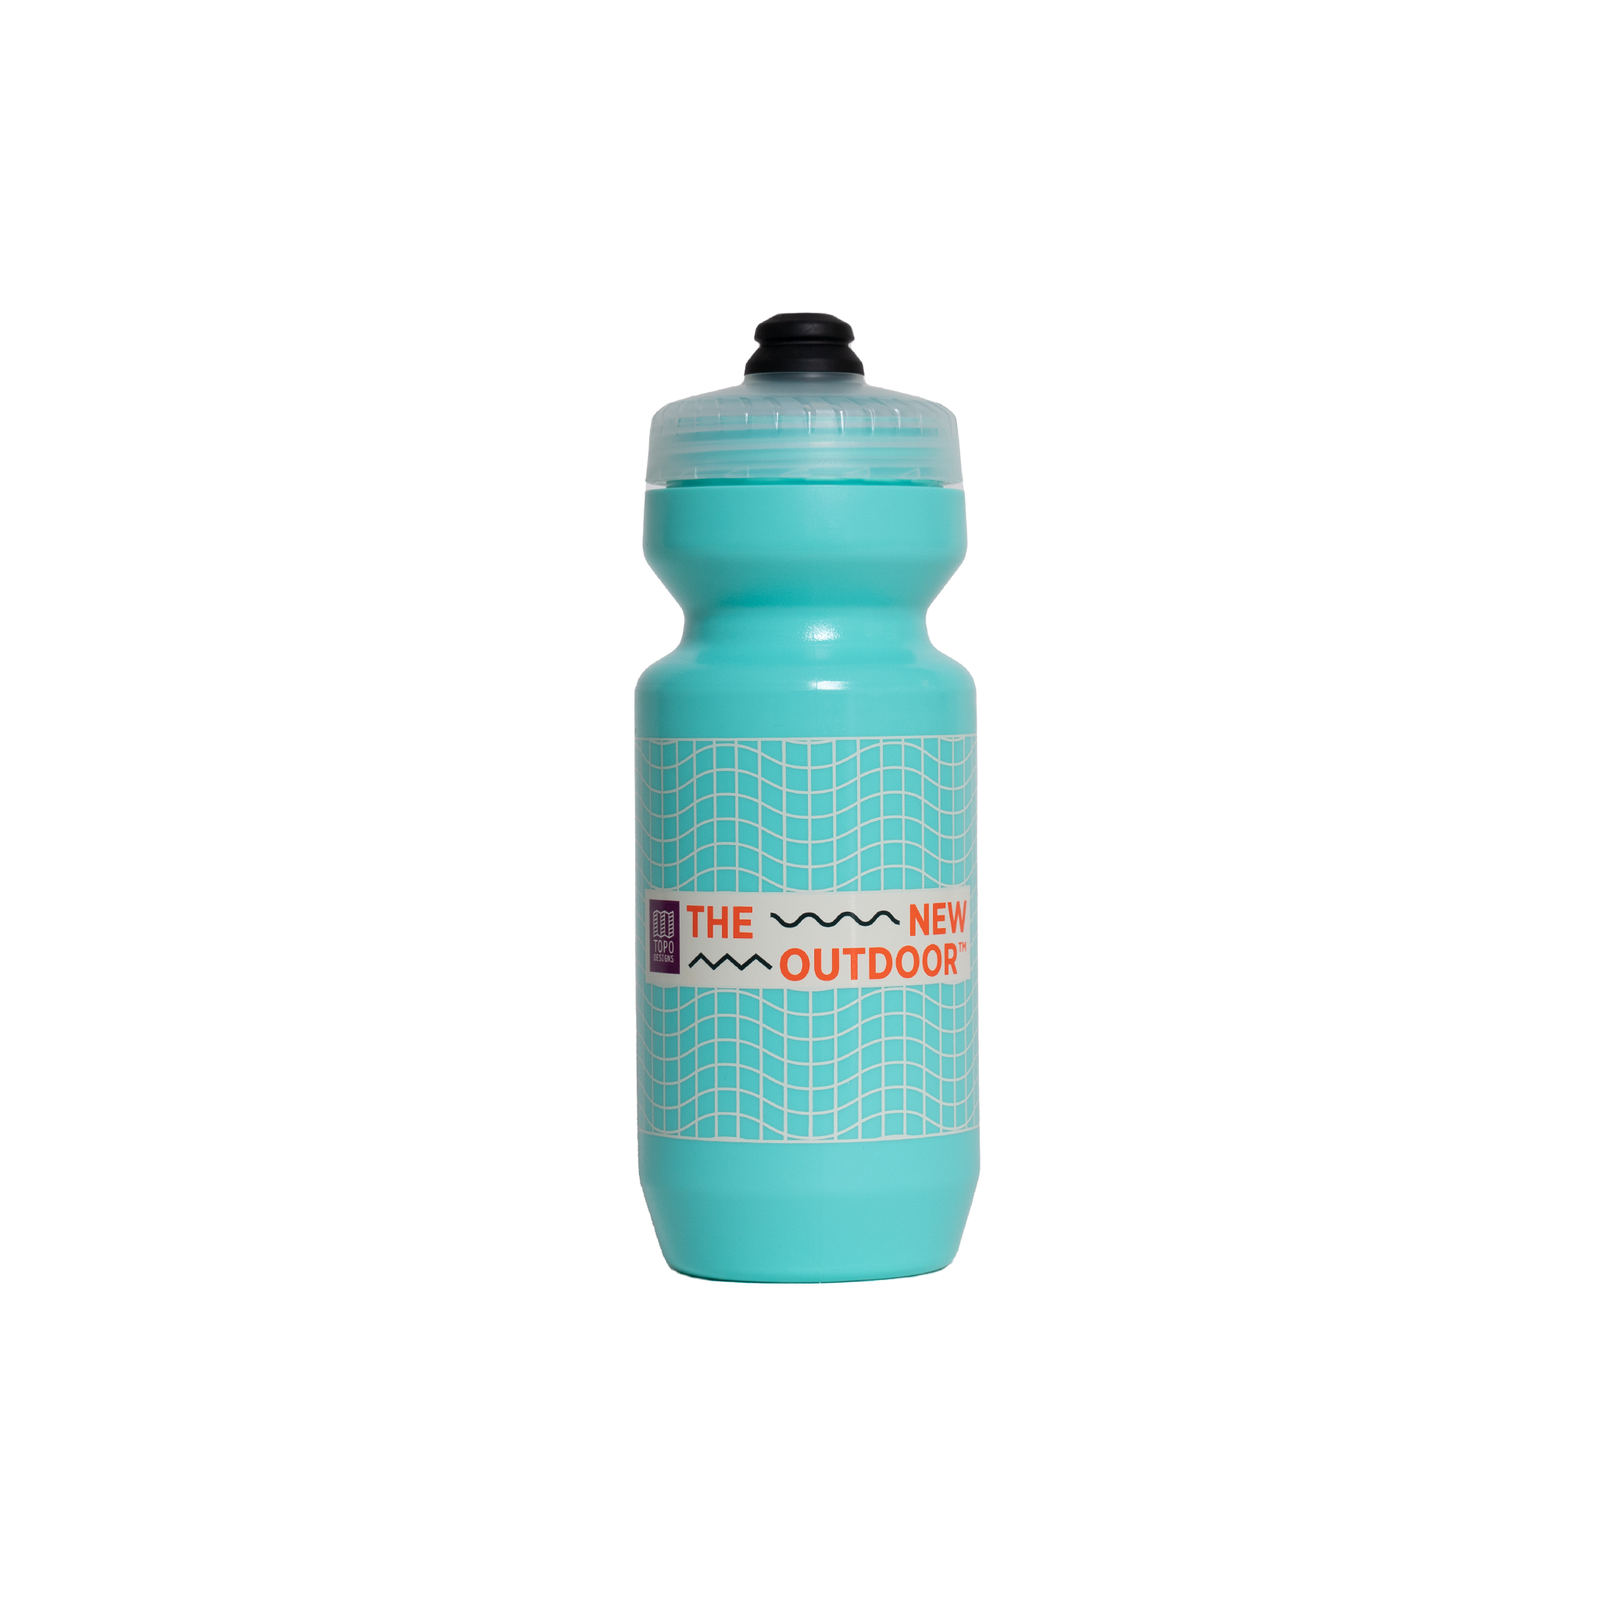 Topo Designs x Specialized Purist 22oz cycling Water Bottle in "The New Outdoor" blue.